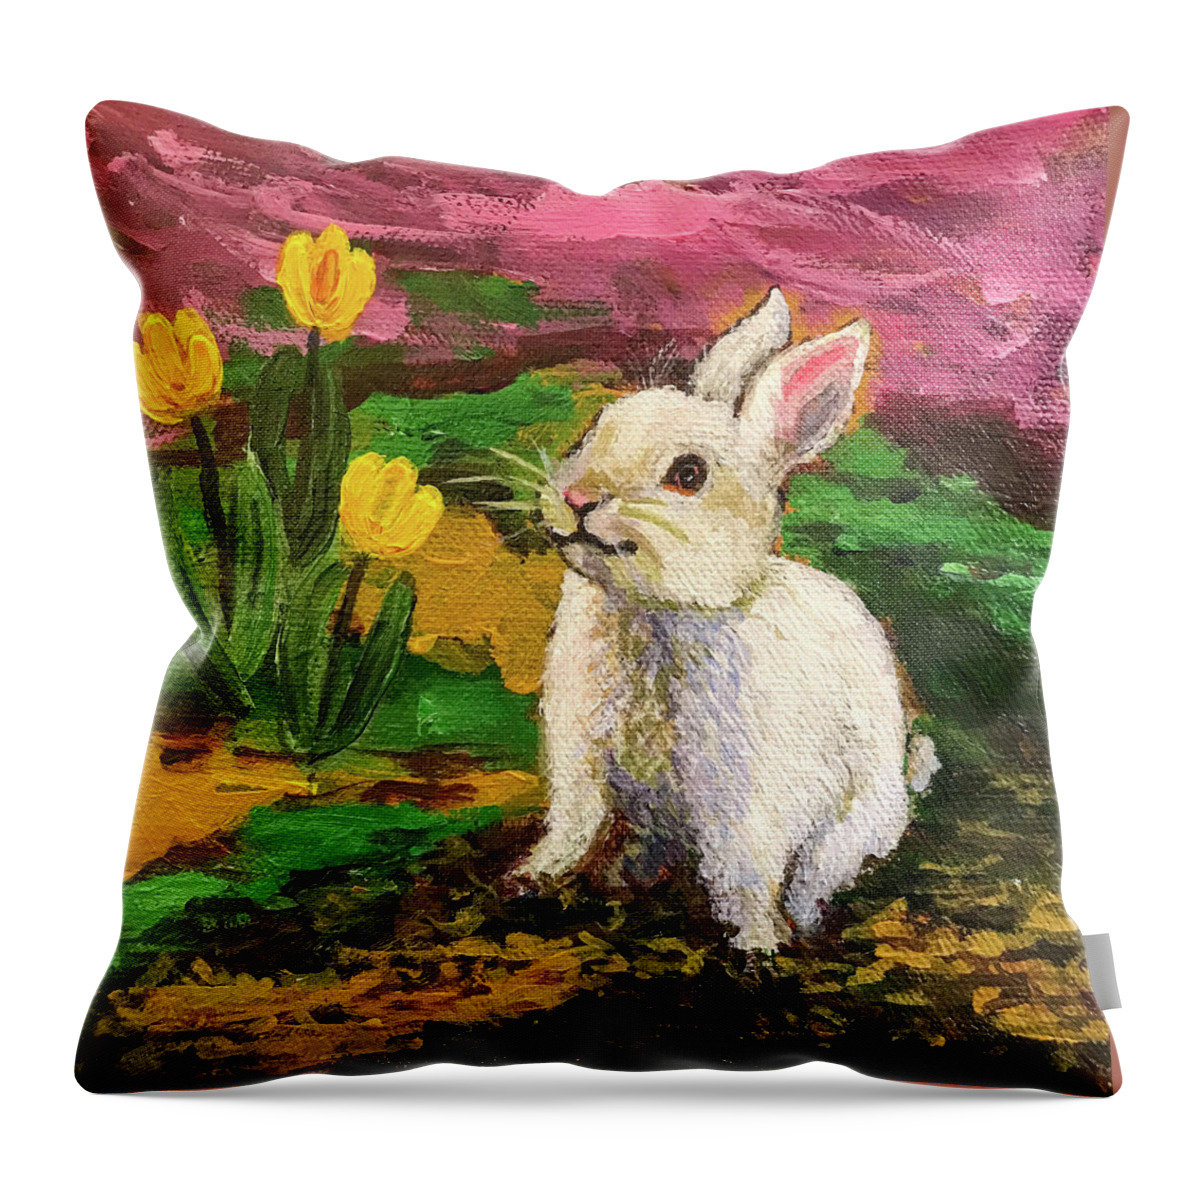 Original Painting Throw Pillow featuring the painting Happy Hoppy Easter by Sherrell Rodgers